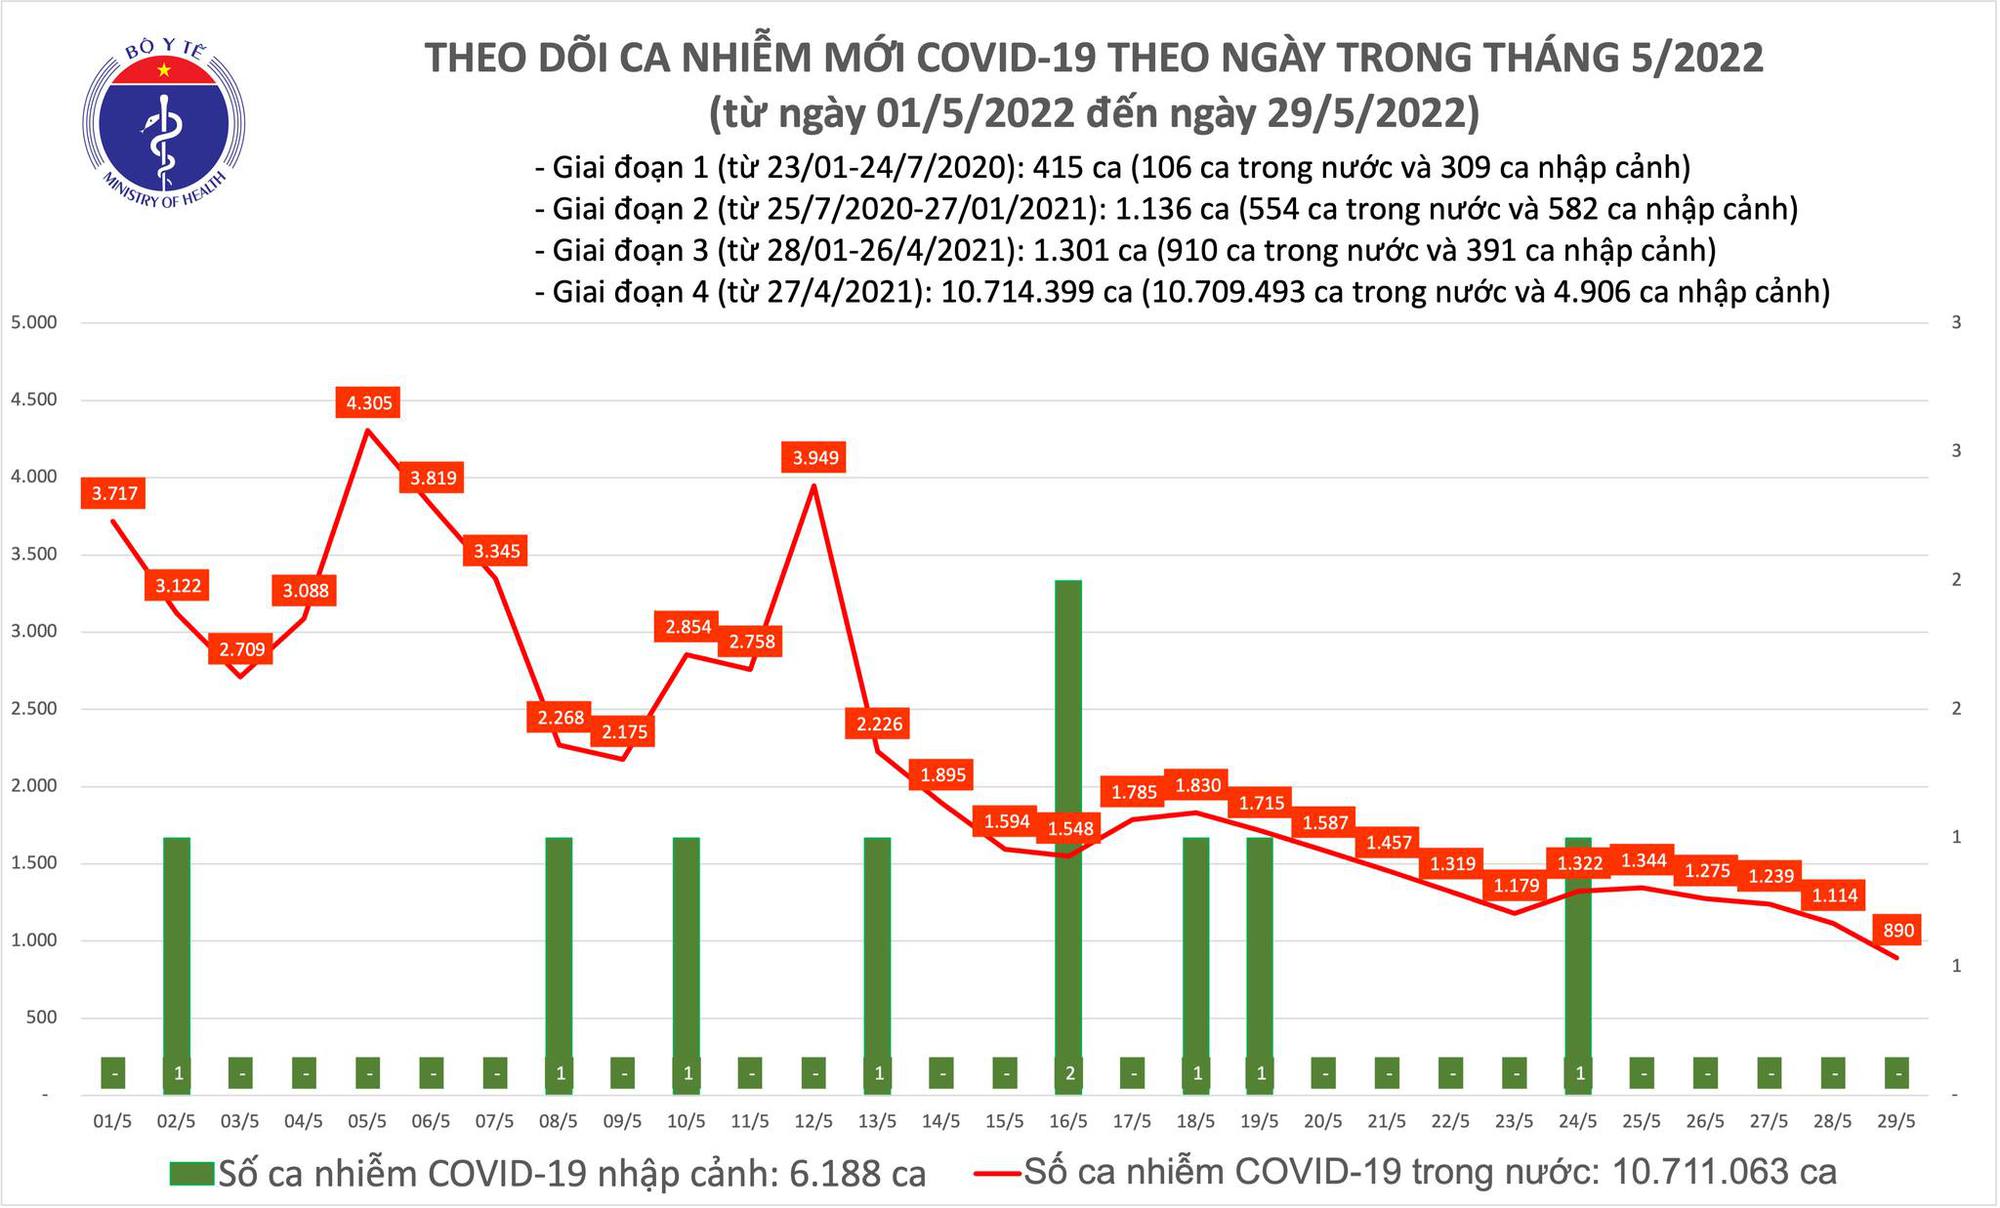 May 29: There are less than 900 new Covid-19 cases - Photo 1.